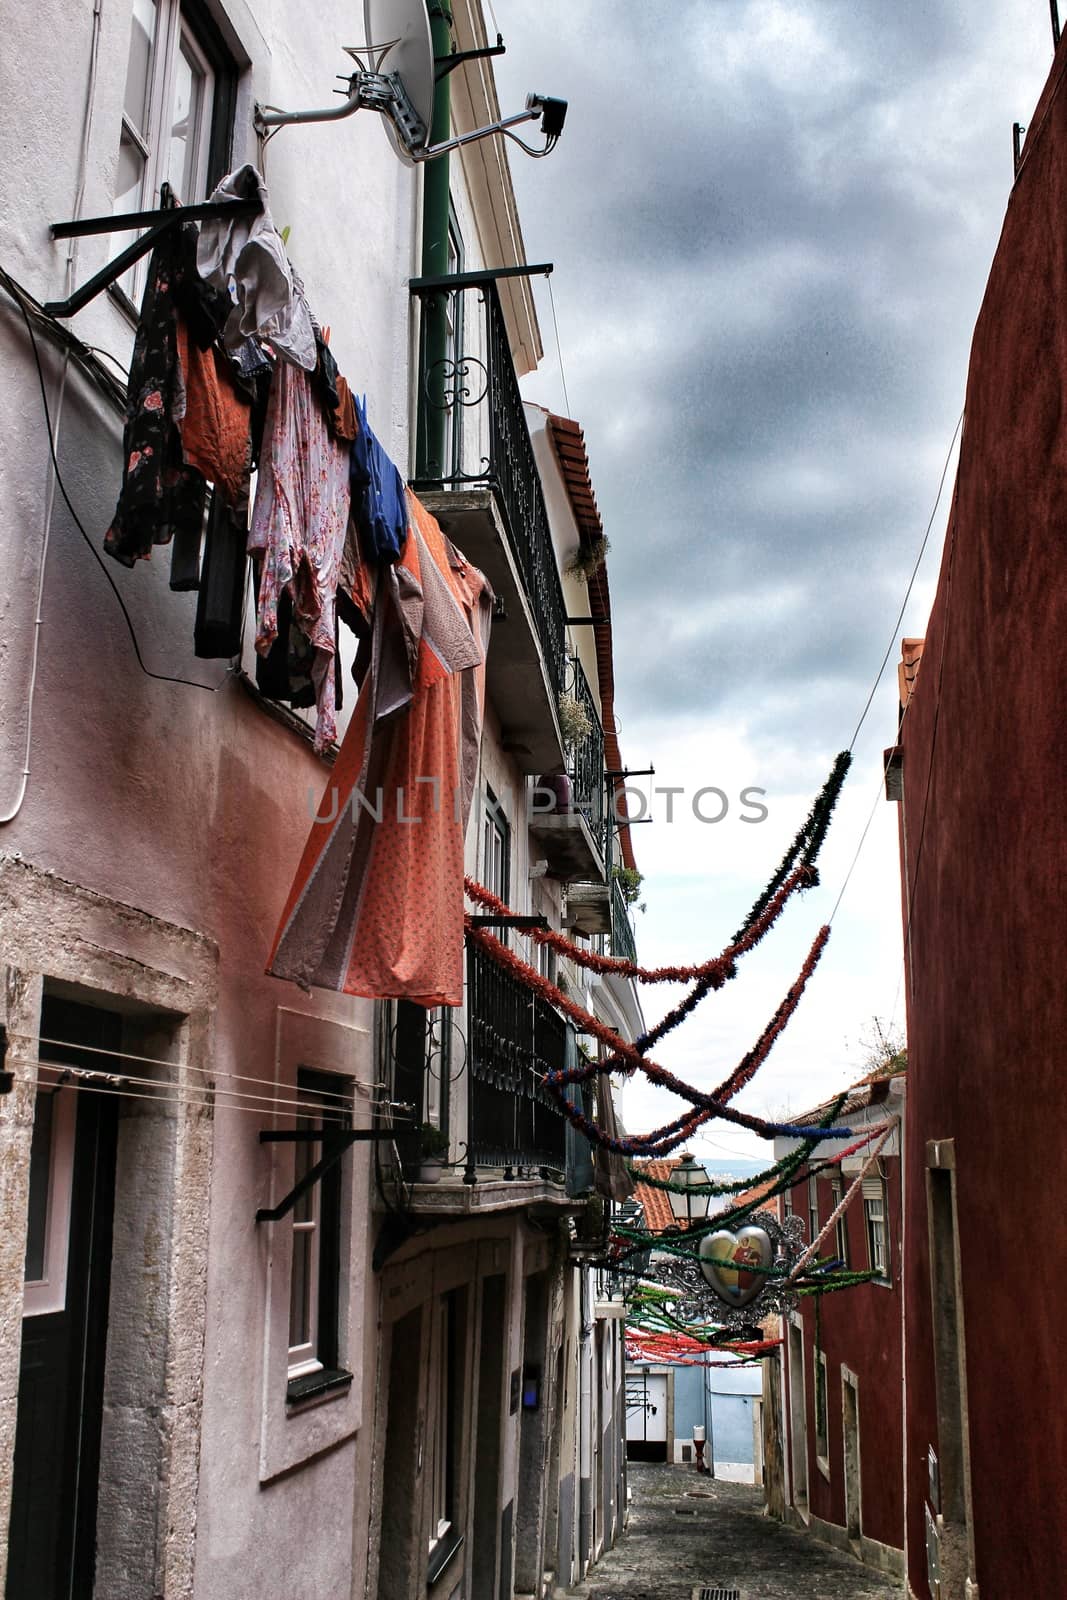 Old facade of typical Lisbon house with hanging clothes in clothesline.